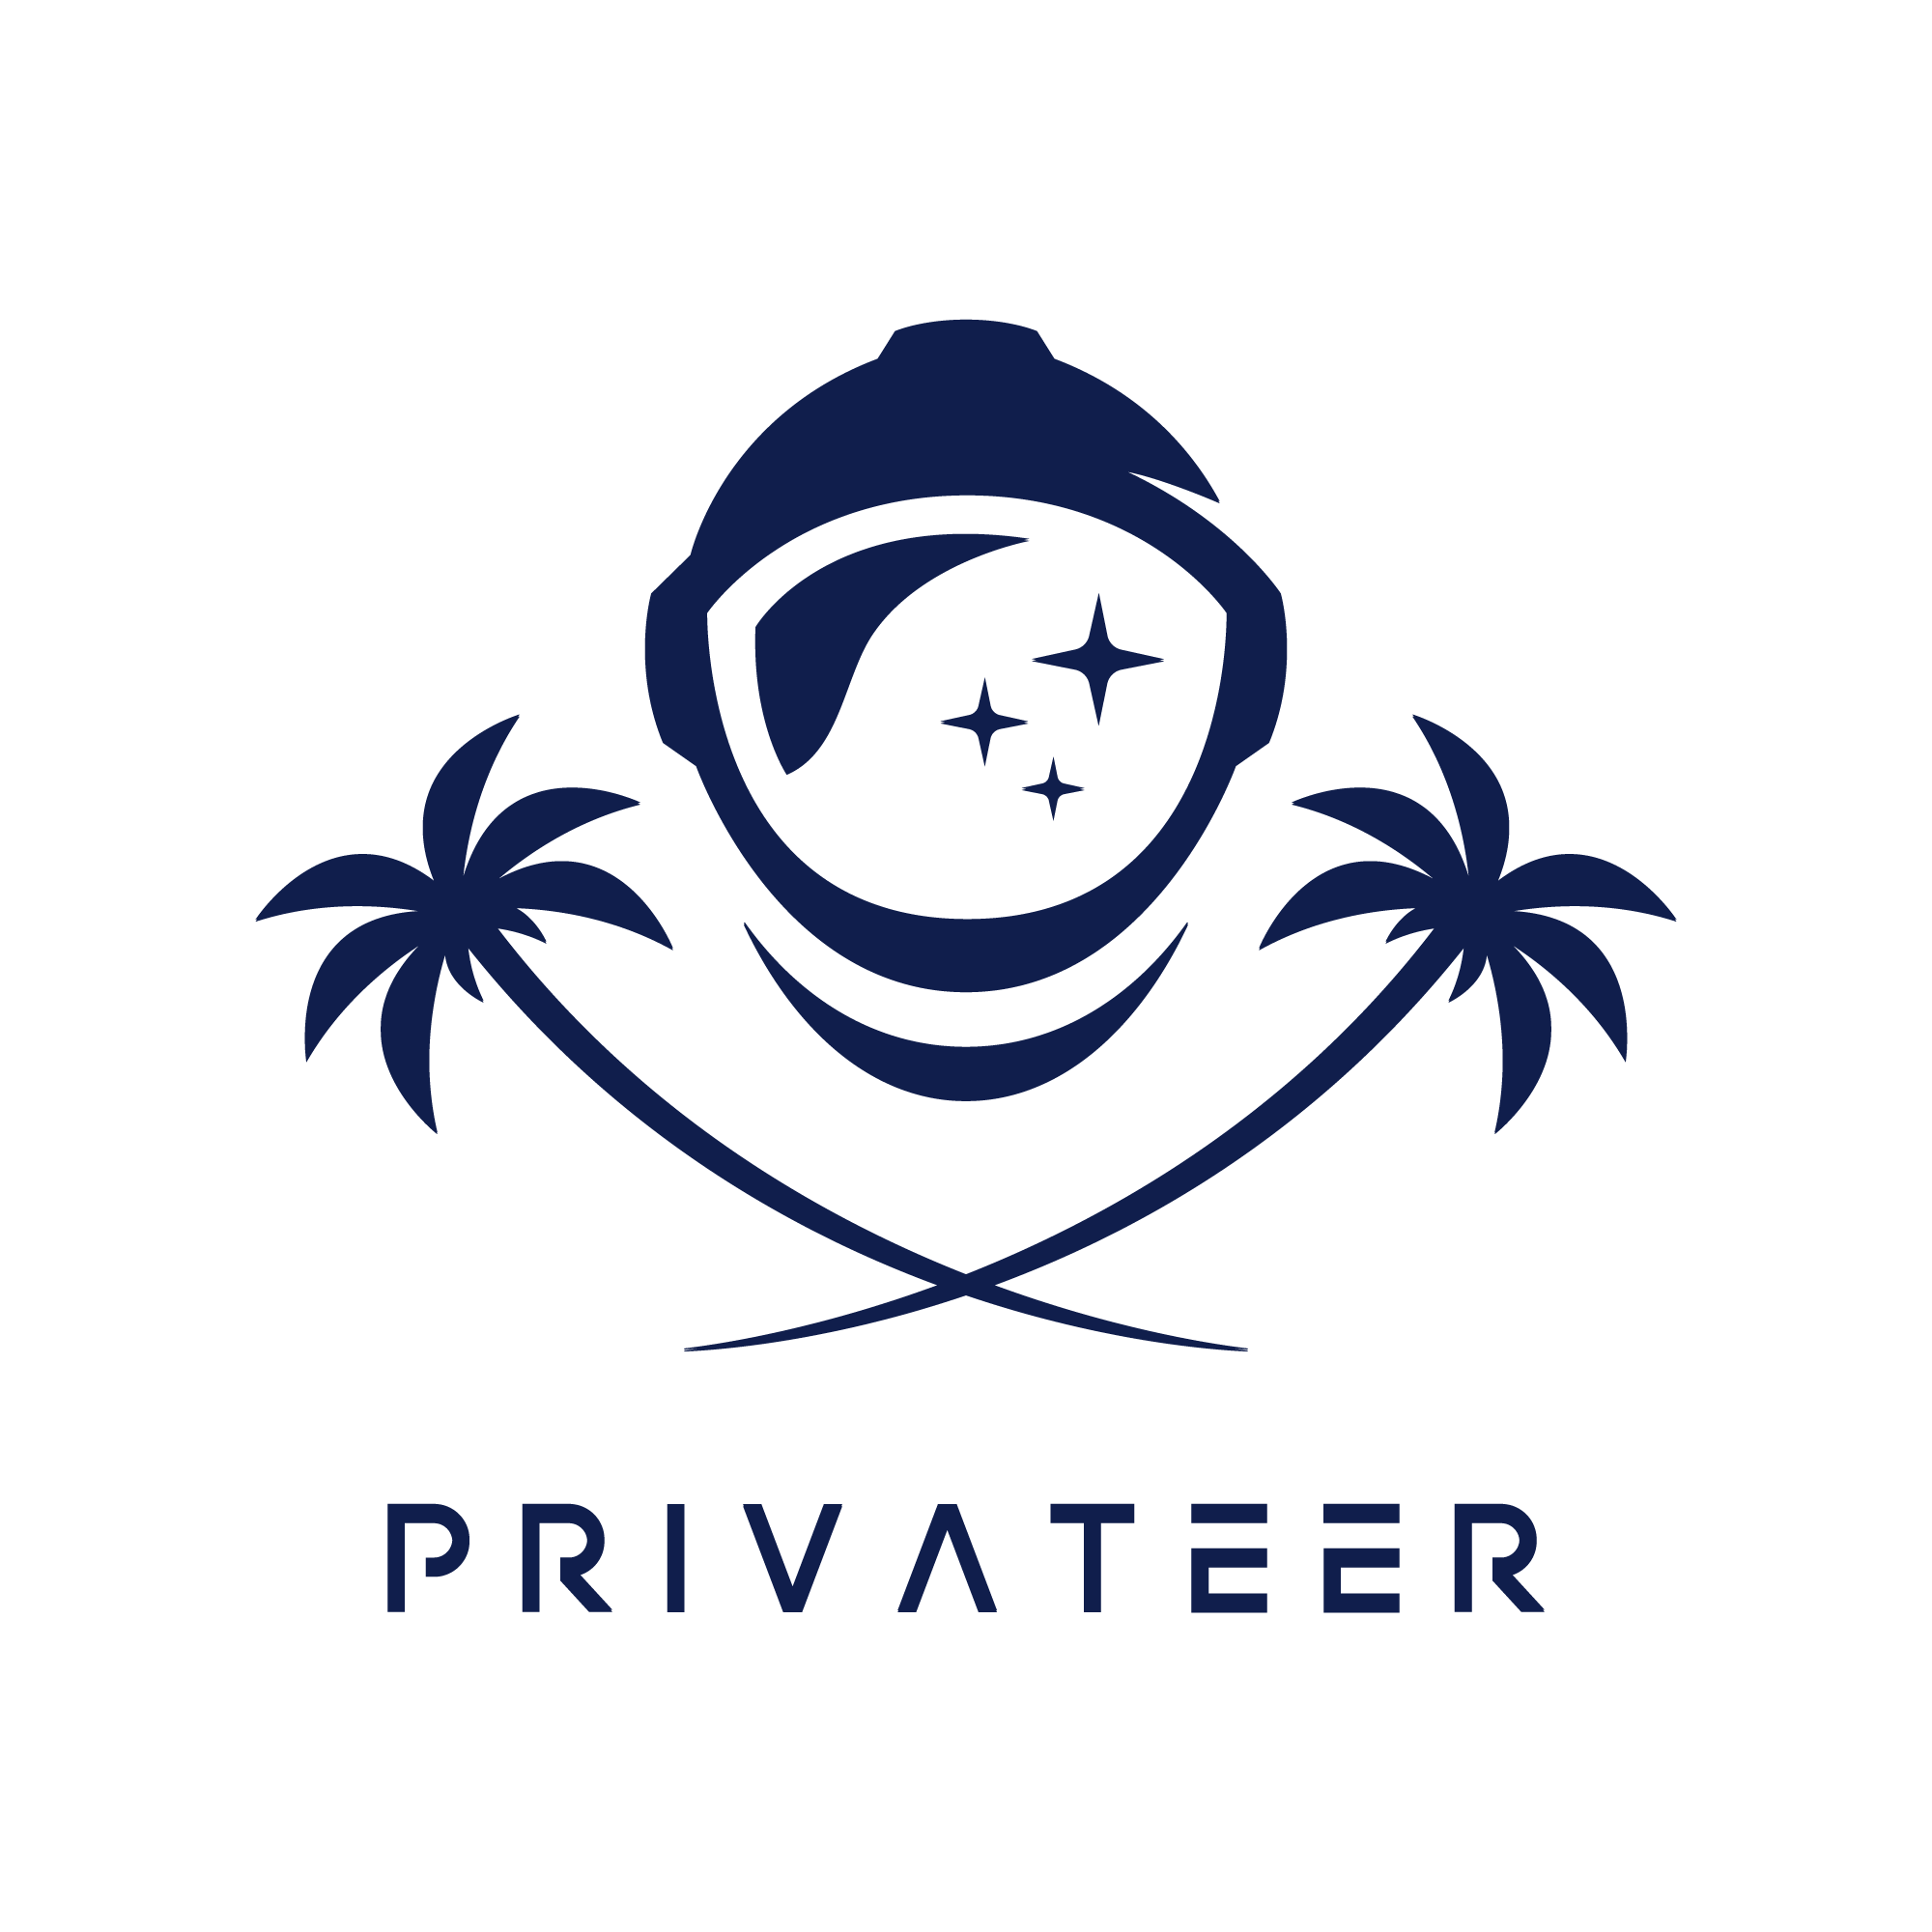 Privateer Logo - Stacked - Navy Blue.png